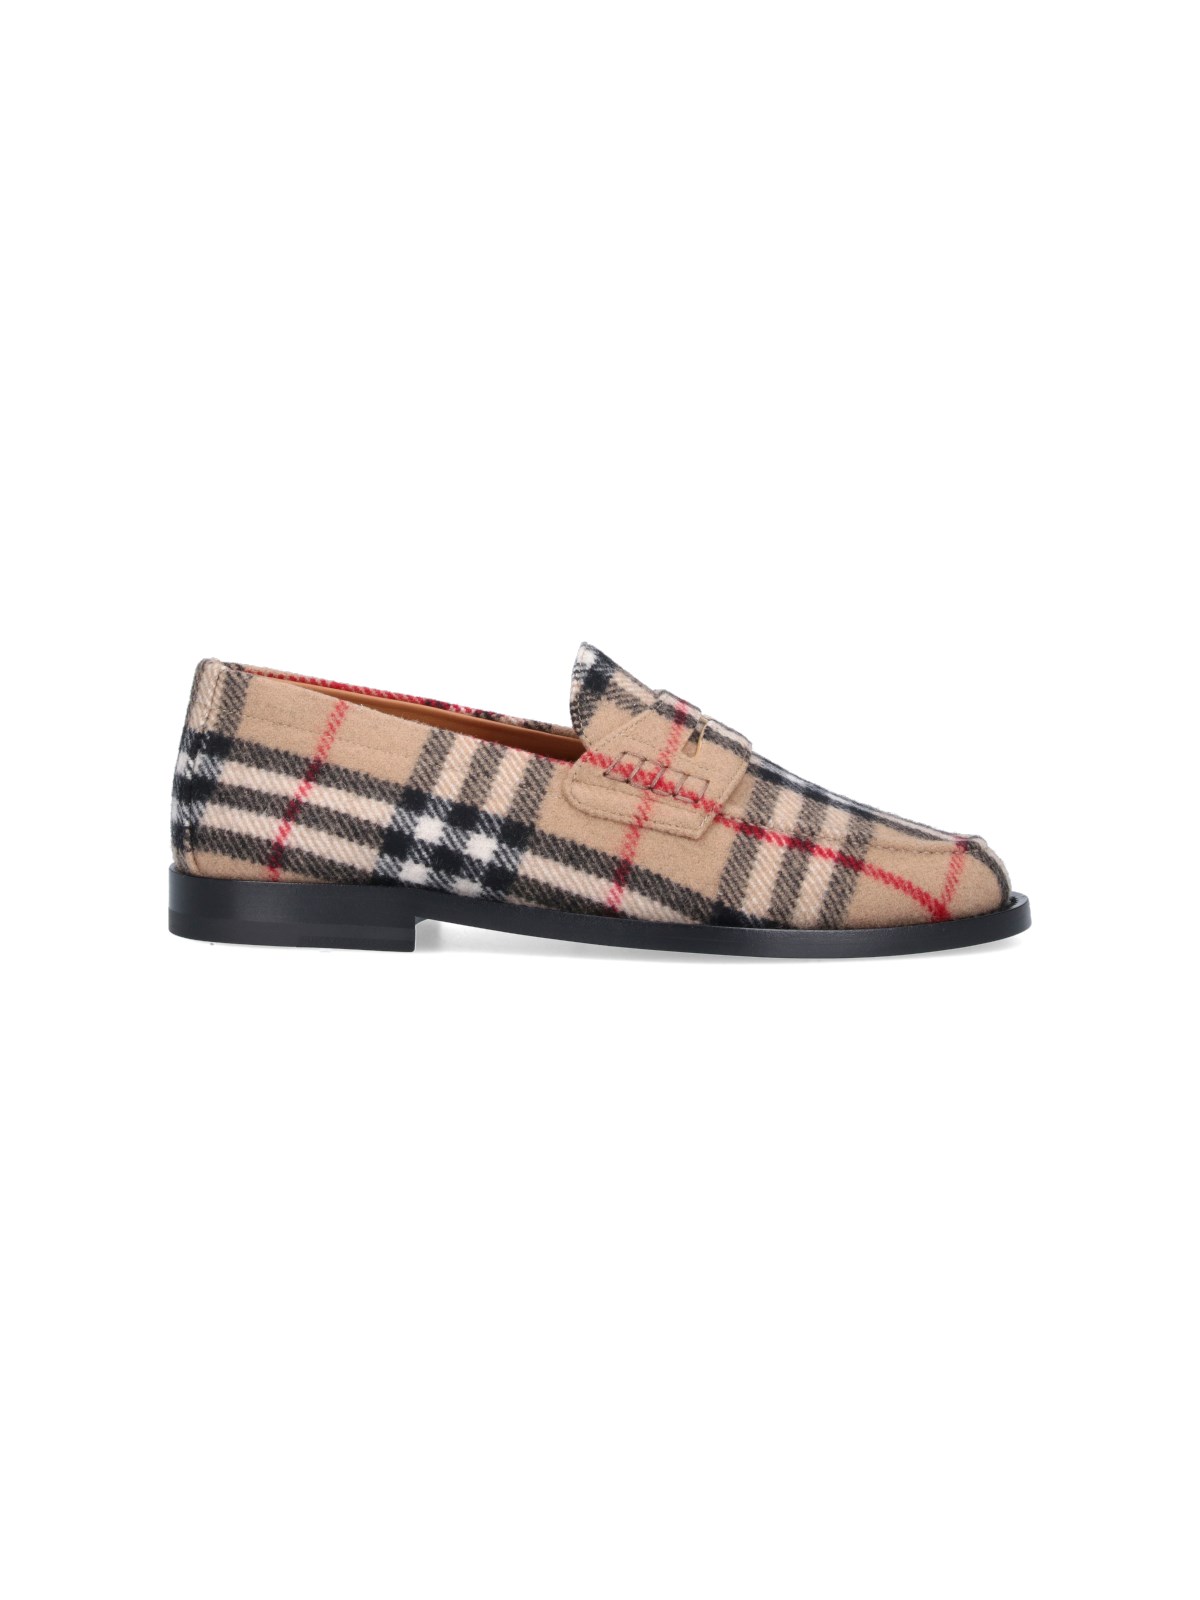 BURBERRY CHECK PATTERN LOAFERS